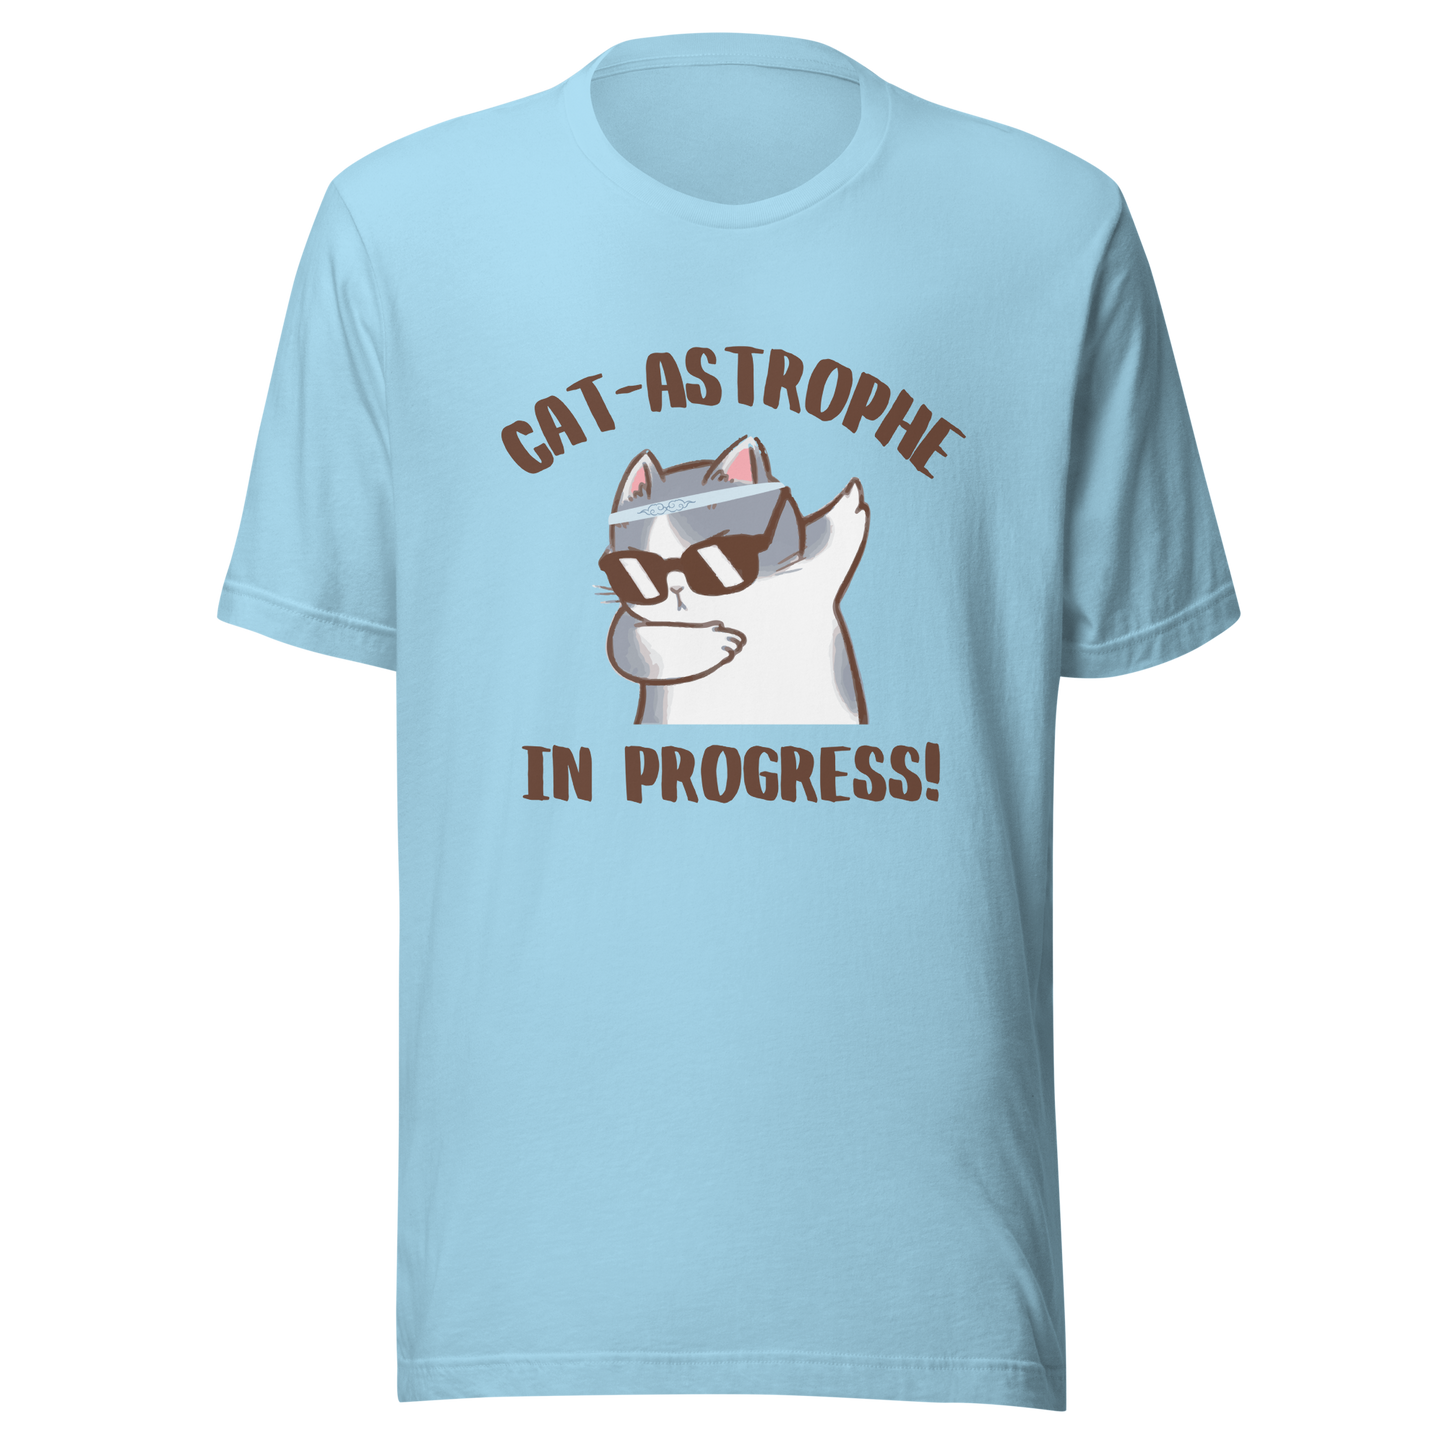 Unisex T-Shirt 'Cat-astrophe in Progress!' - A Playful and Whimsical Design for Cat Lovers